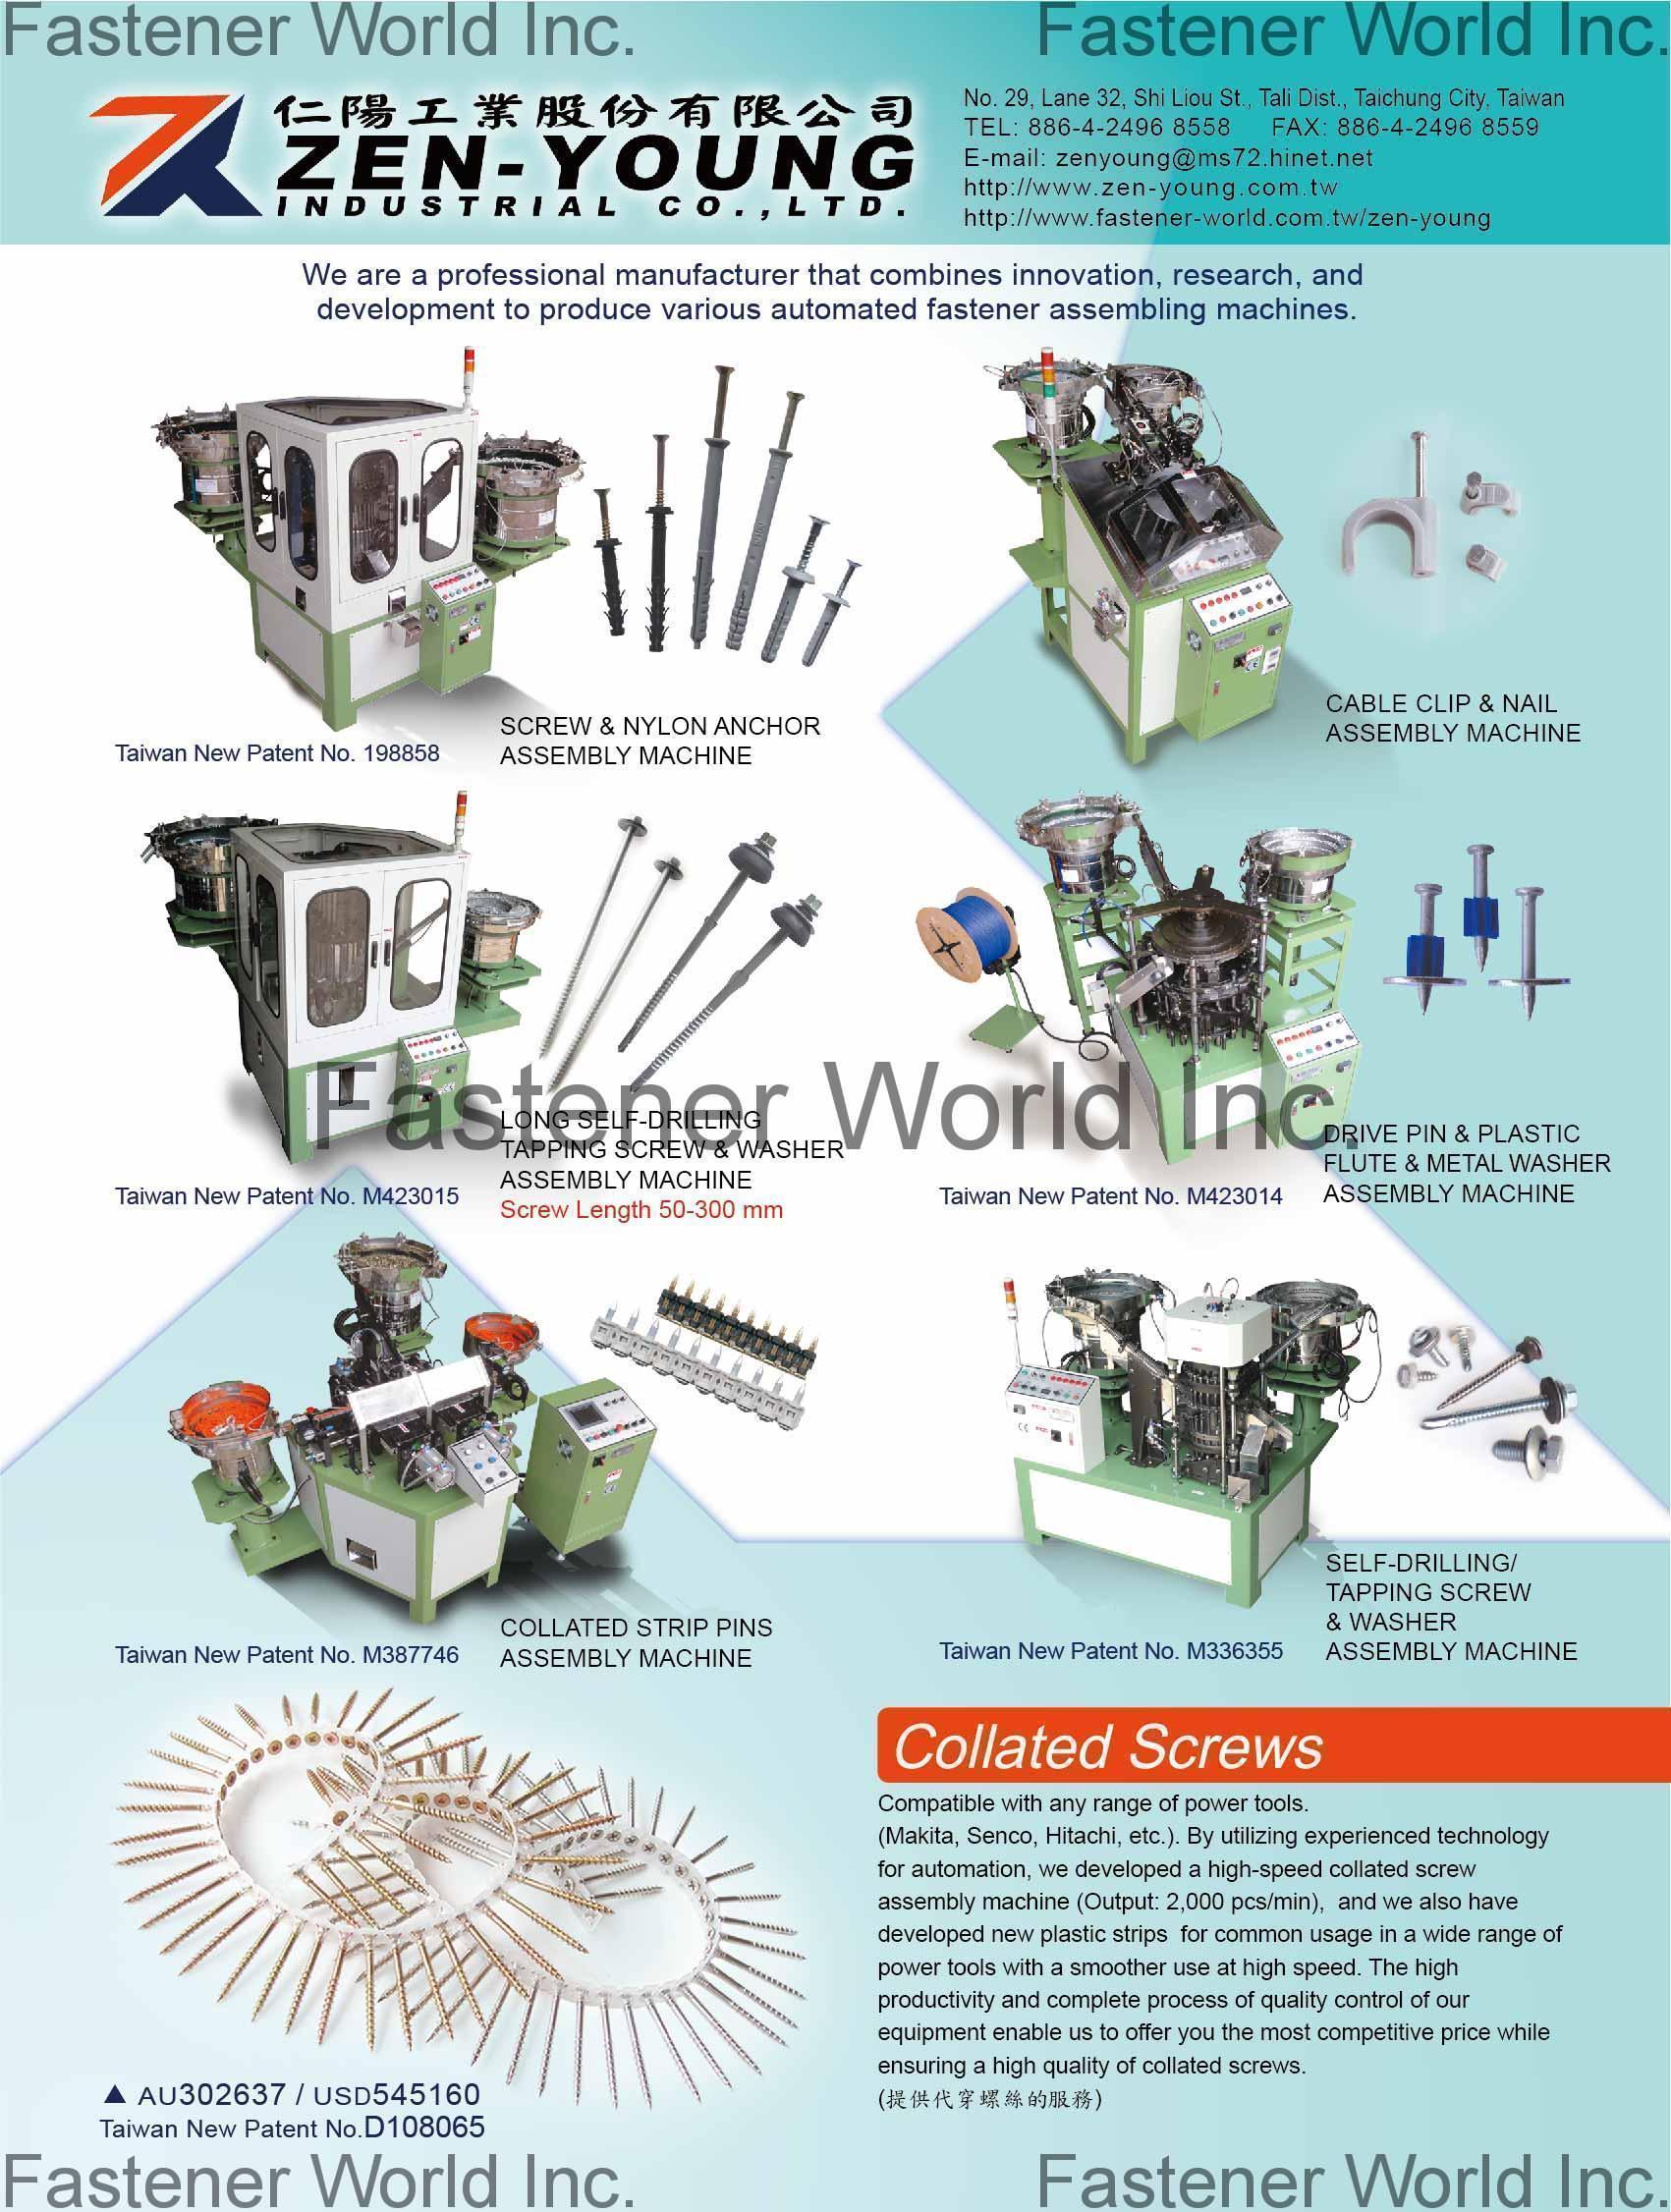 ZEN-YOUNG INDUSTRIAL CO., LTD.  , Screw & Nylon Anchor Assembly Machine,Cable Clip & Nail Assembly Machine,Long Self-Drilling Tapping Screw & Washer Assembly Machine,Drive Pin & Plastic Flute & Metal Washer Assembly Machine,Collated Strip Pins Assembly Machine,Self-Drilling/Tapping Screw & Washer Assembly Machine,Collated Screws , Fastener Maker